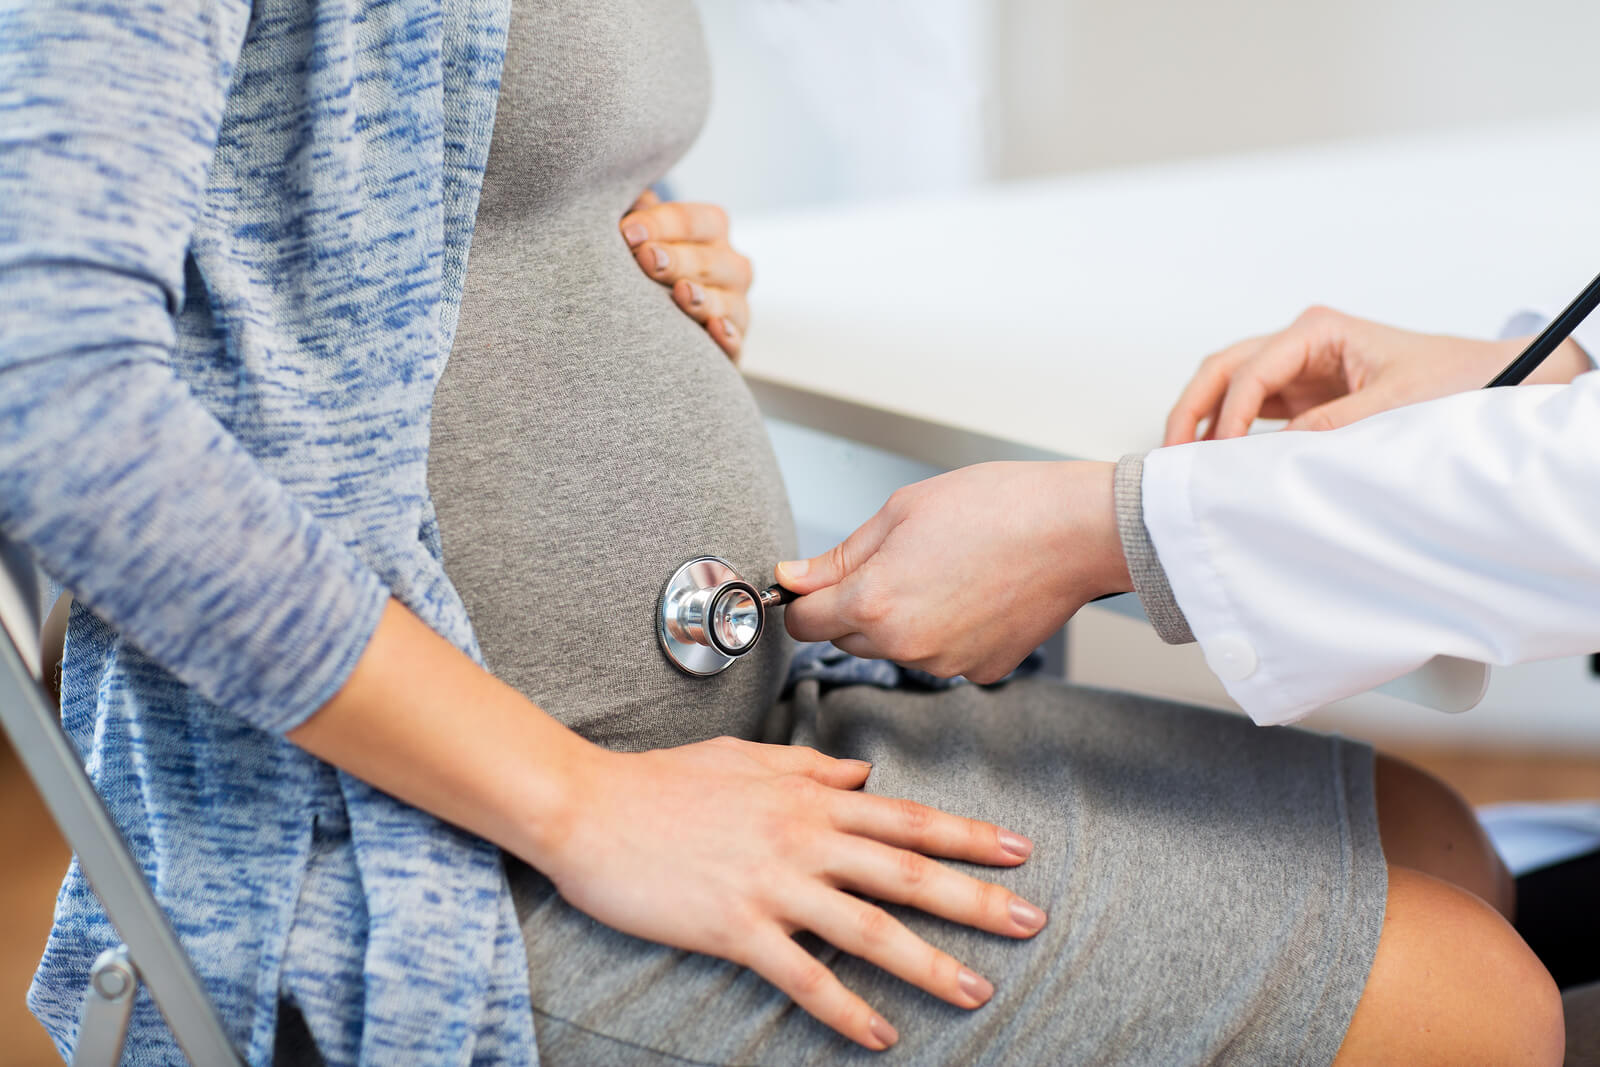 About Pregnant Women's Health